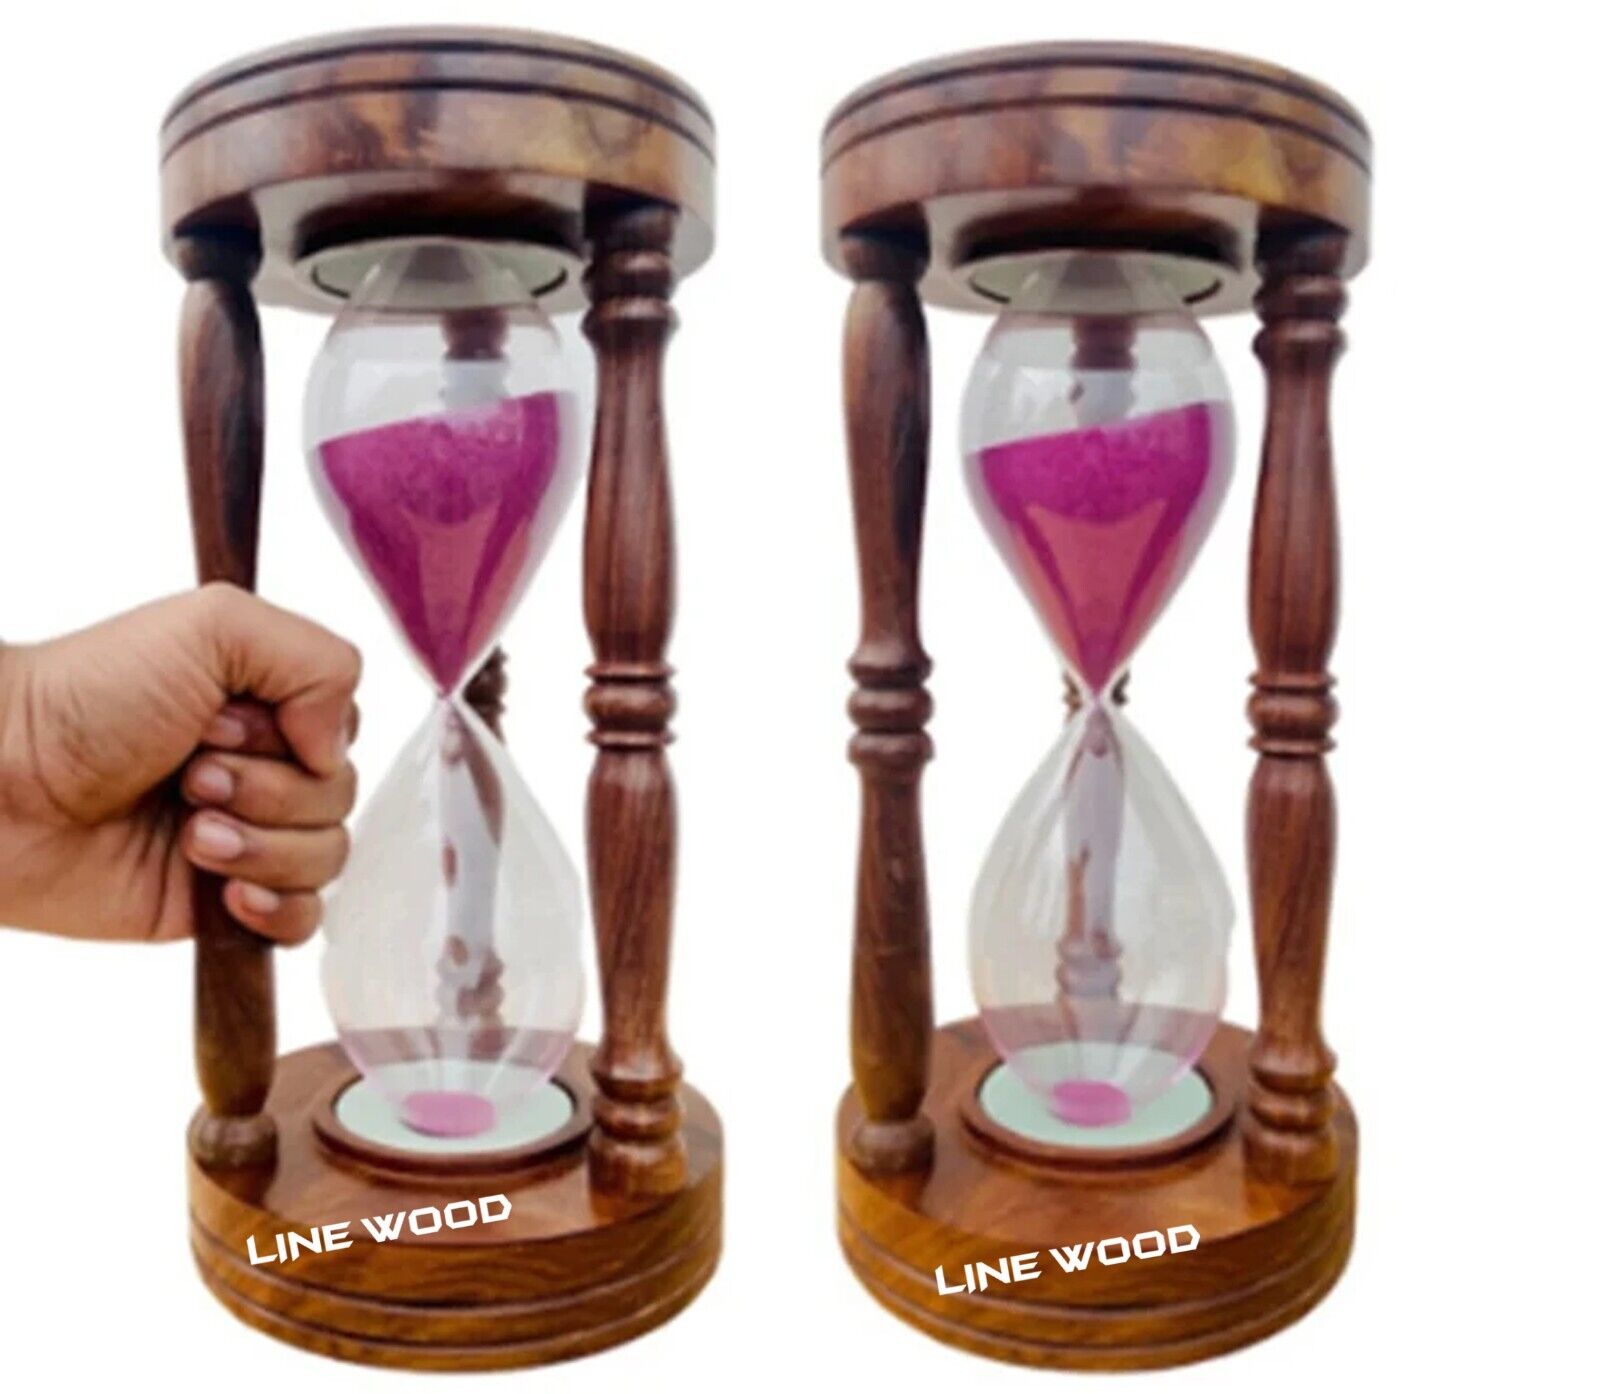 The 60 minute hourglass has cool Wooden bases & stand, matched with the stylish